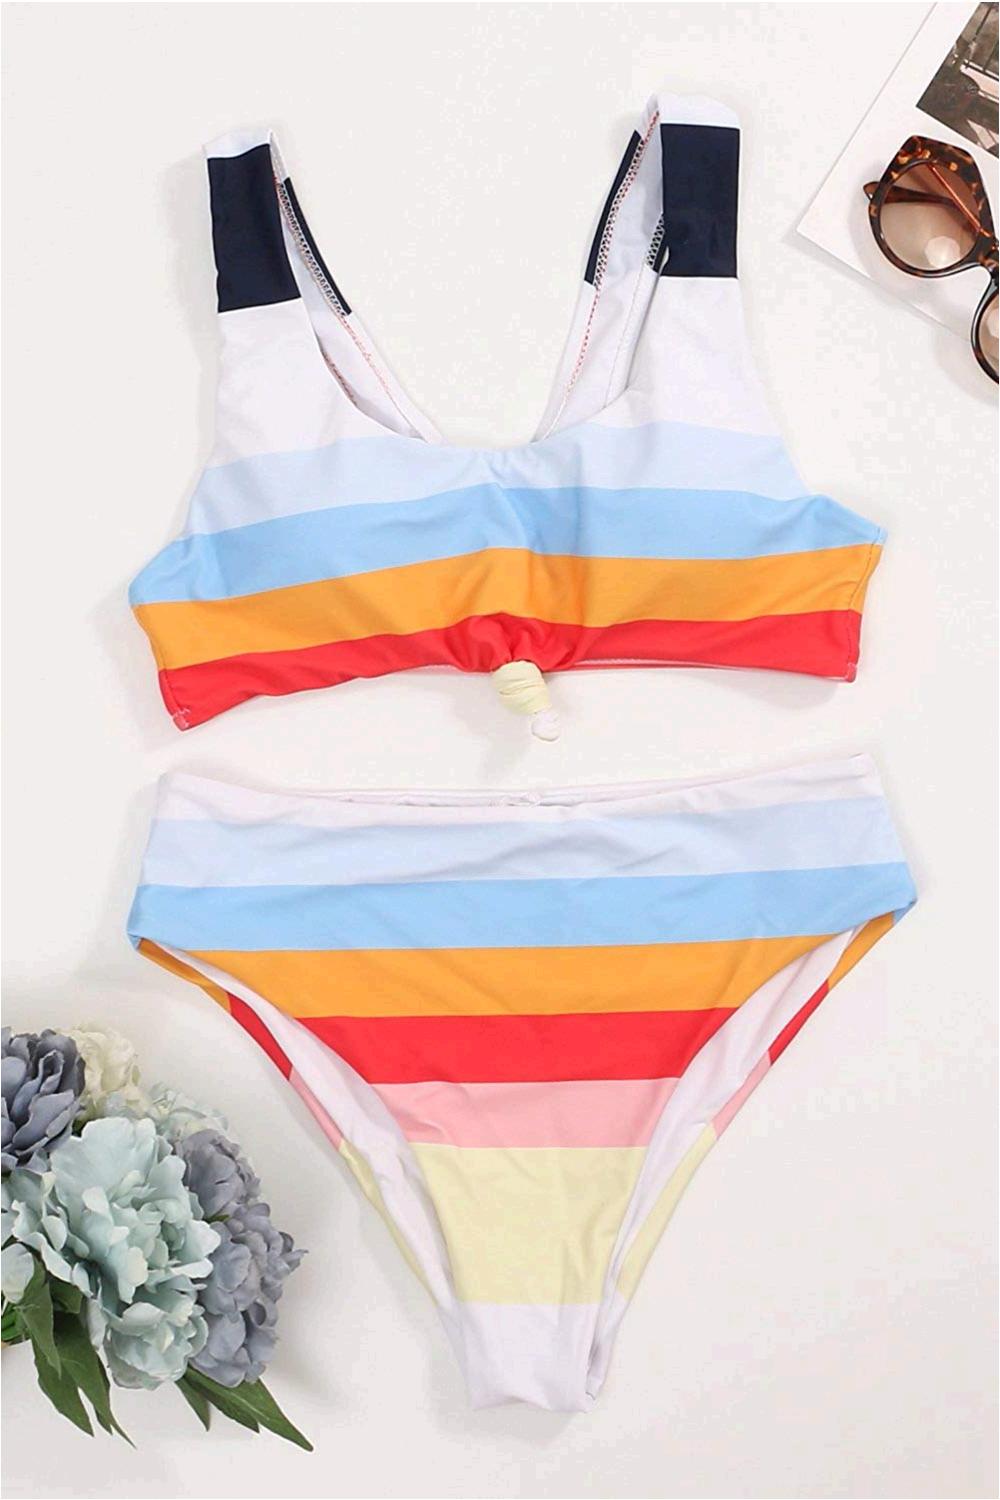 Honlyps Two Piece High Waisted Bathing Suit Striped Bikini Multicolor